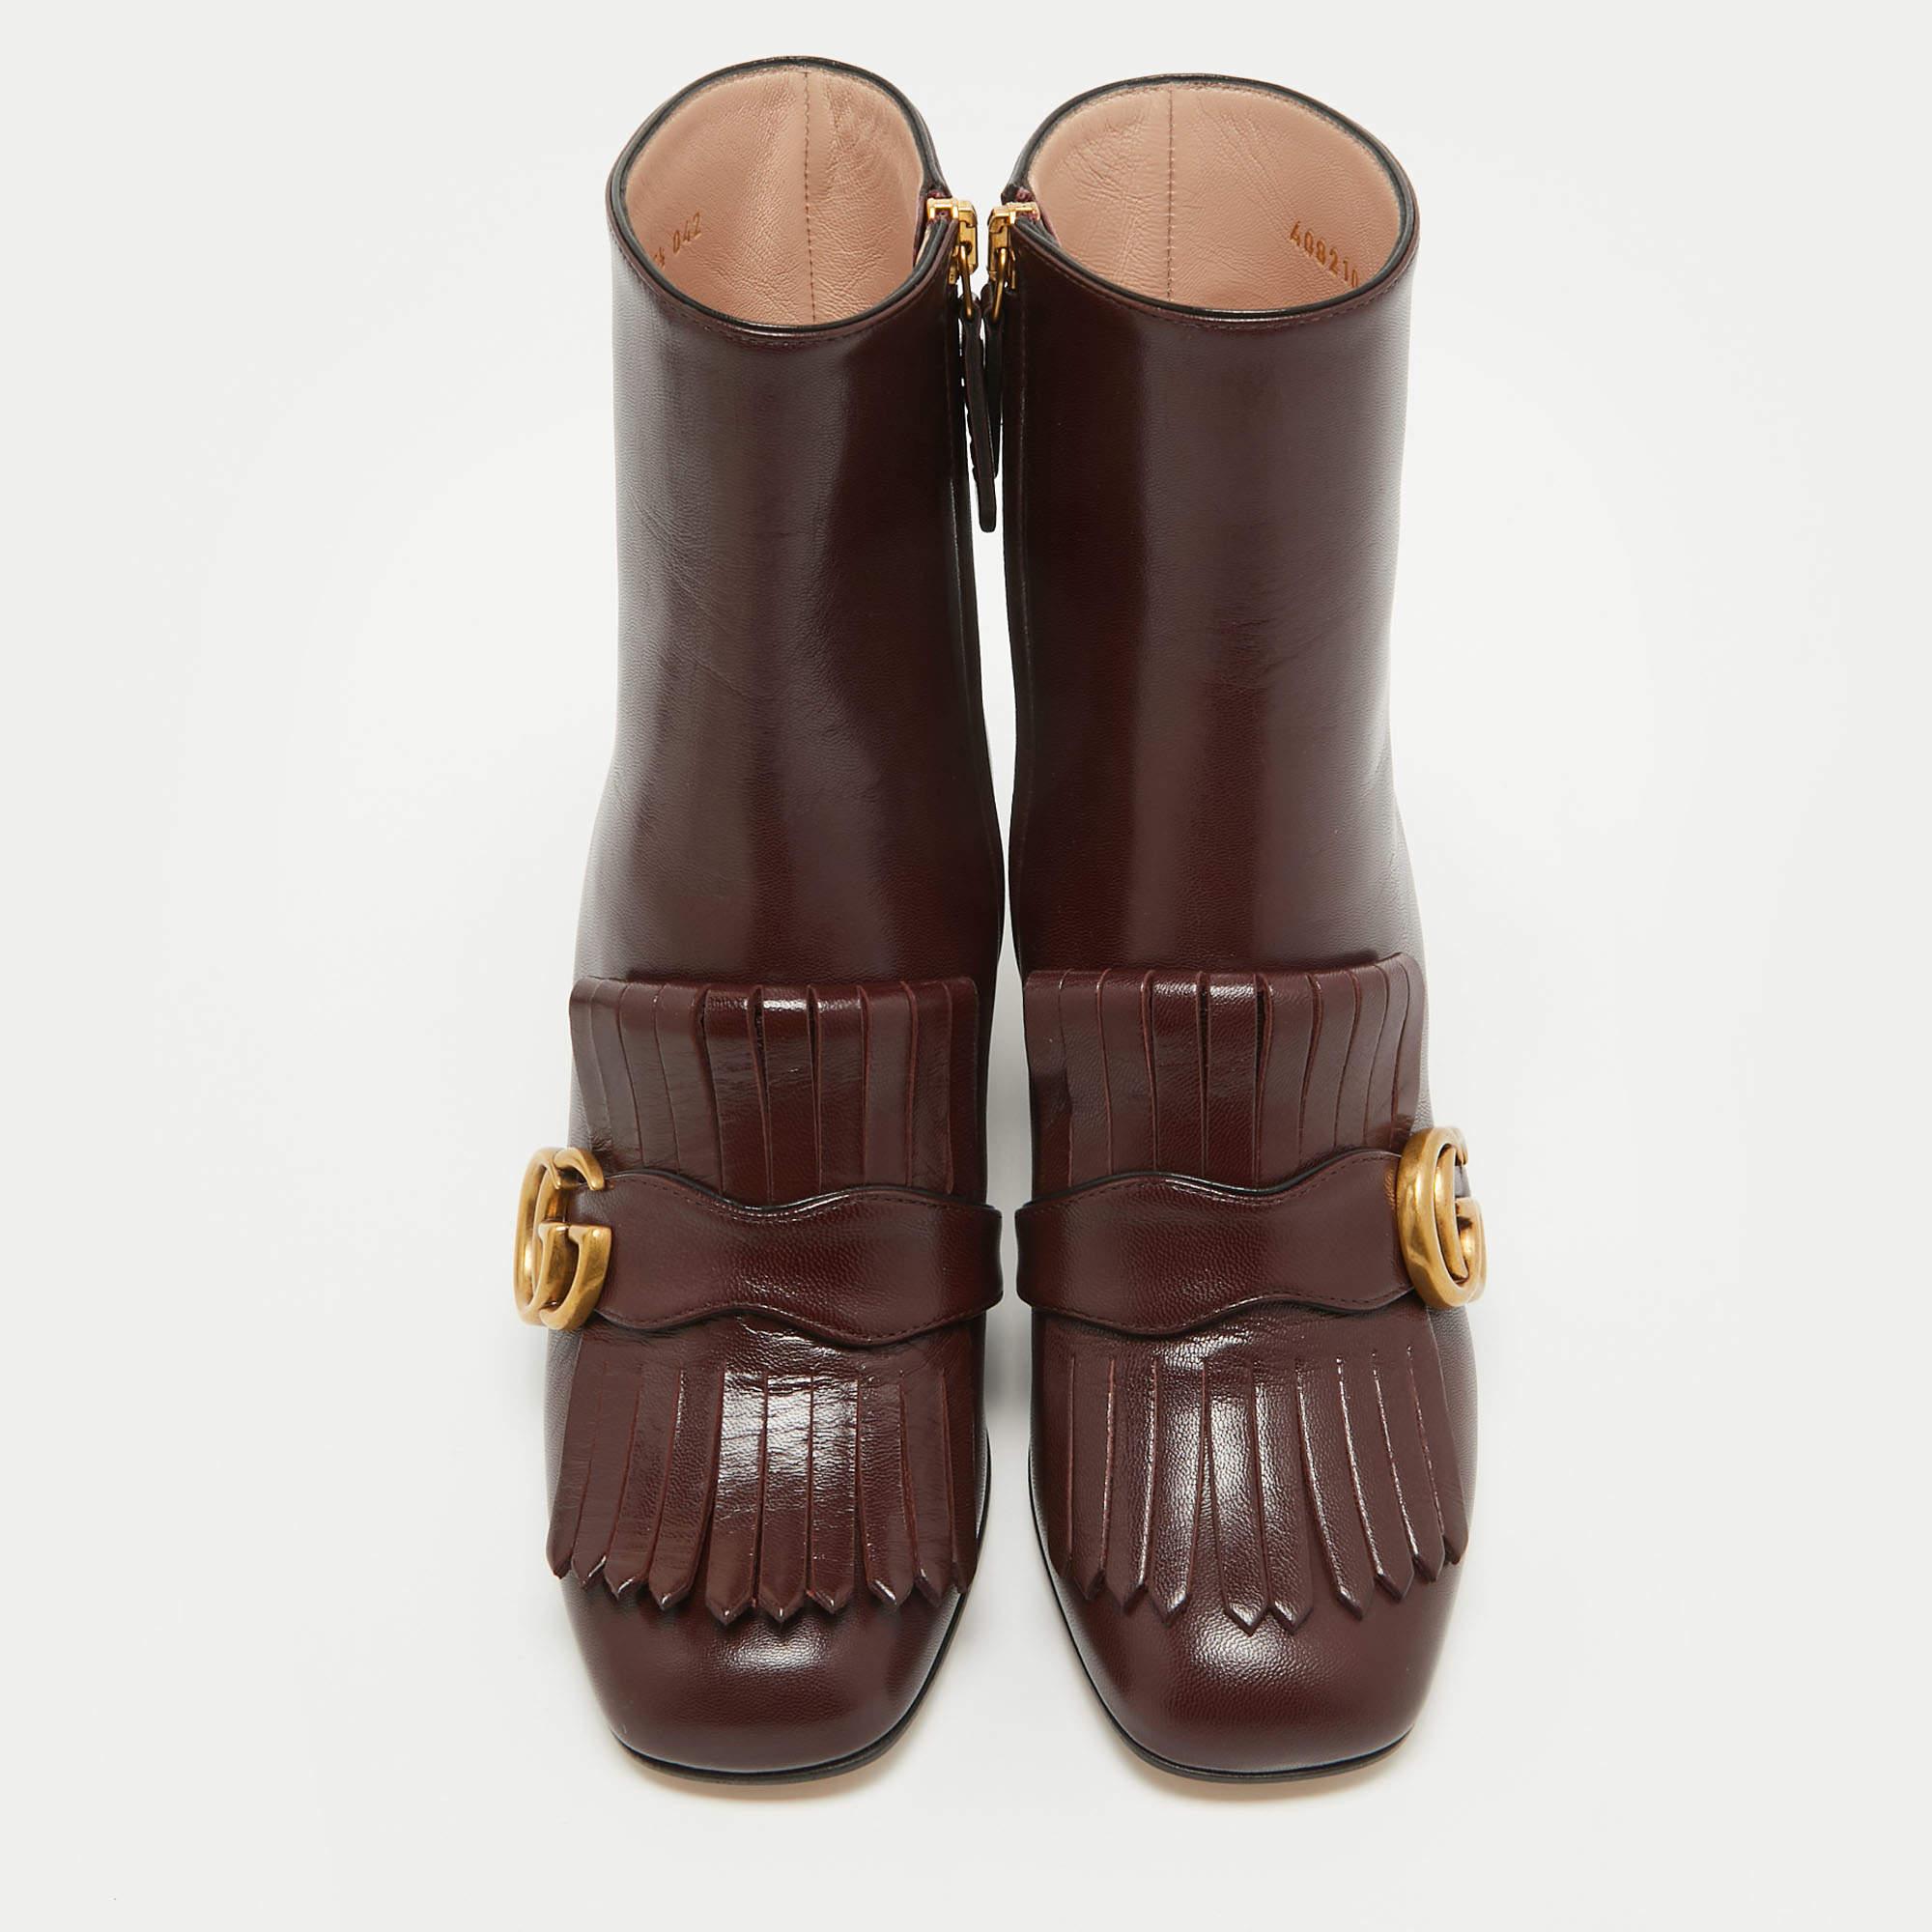 Indulge in opulent sophistication with the Gucci GG Marmont ankle boots. Crafted from luxurious leather, these boots exude timeless elegance with their signature GG motif and playful fringe detailing. Elevate any ensemble with their rich burgundy